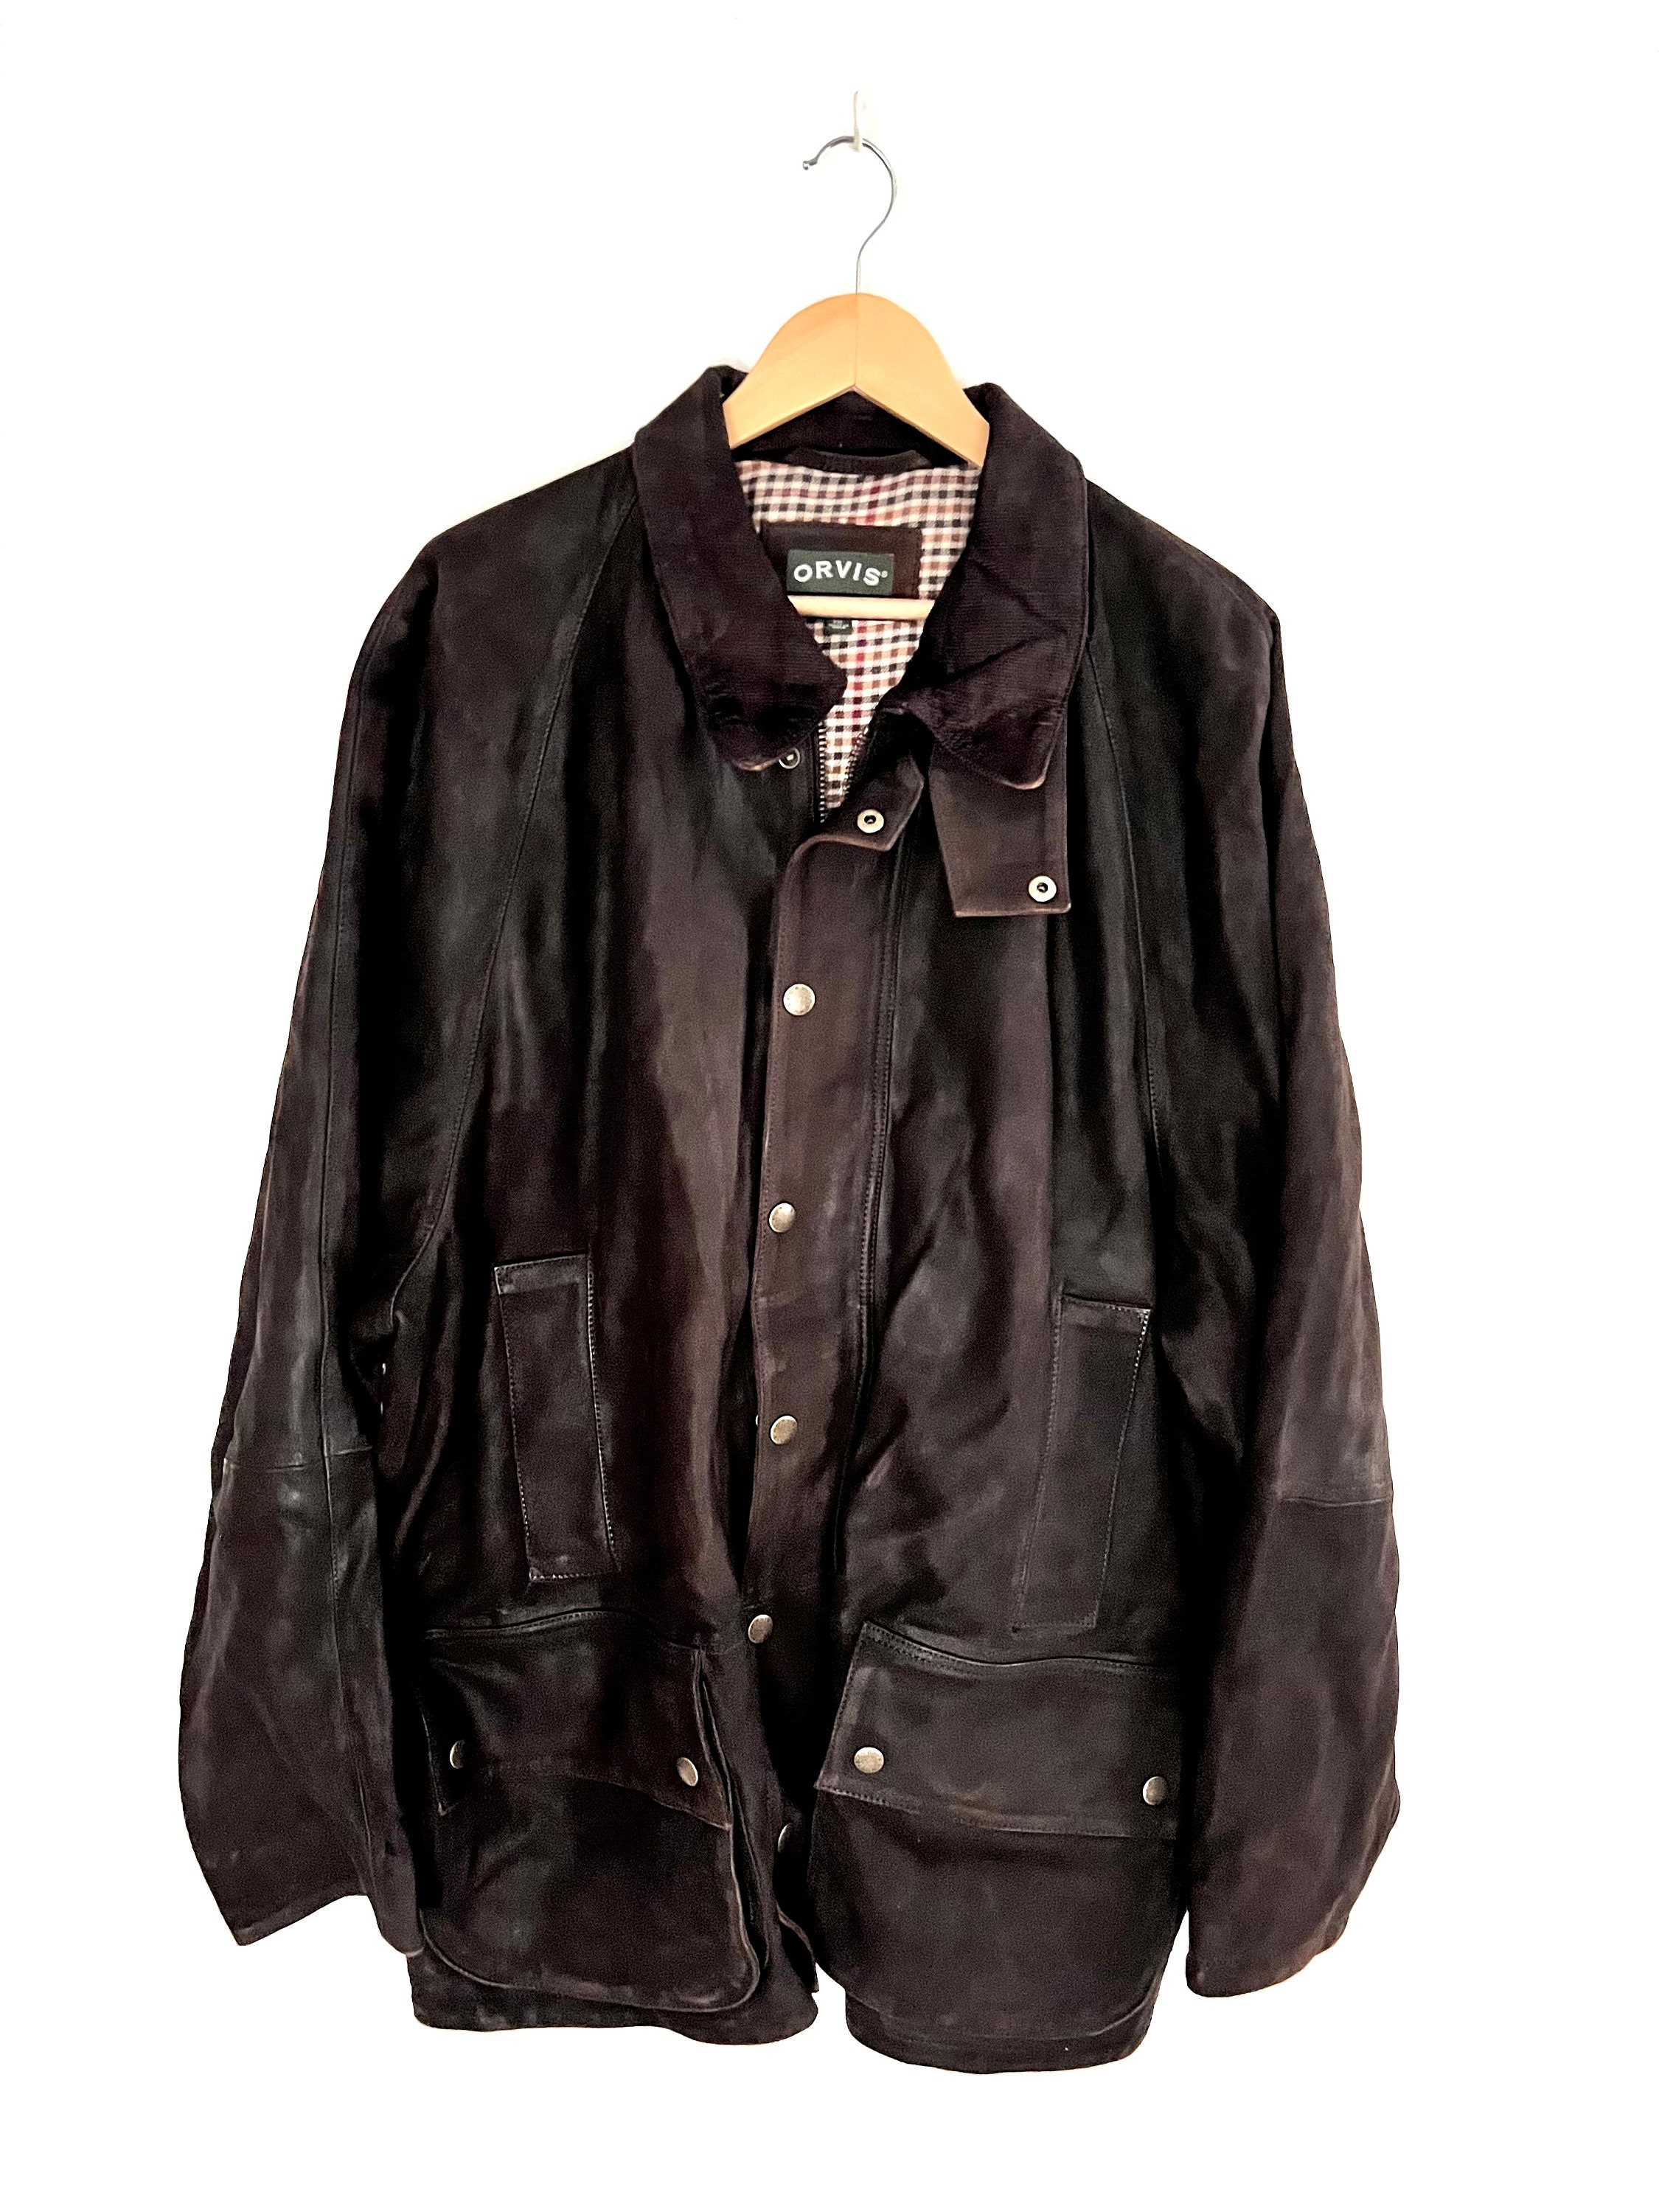 Vintage Orvis Company Fly Fishing Schools Men's Brown Leather Jacket Size XL